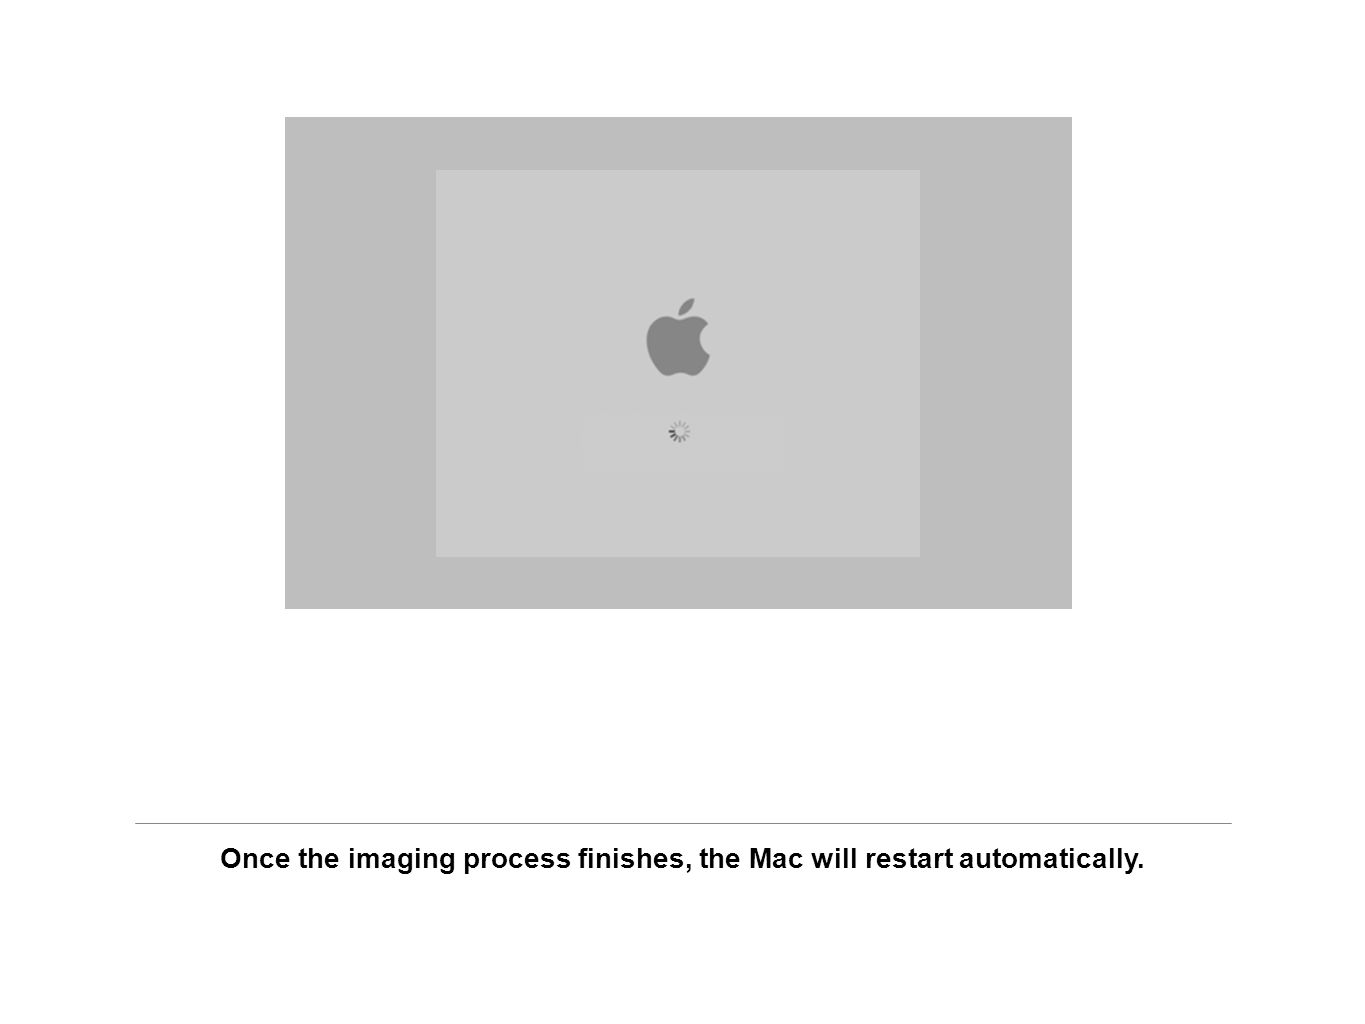 Once the imaging process finishes, the Mac will restart automatically.